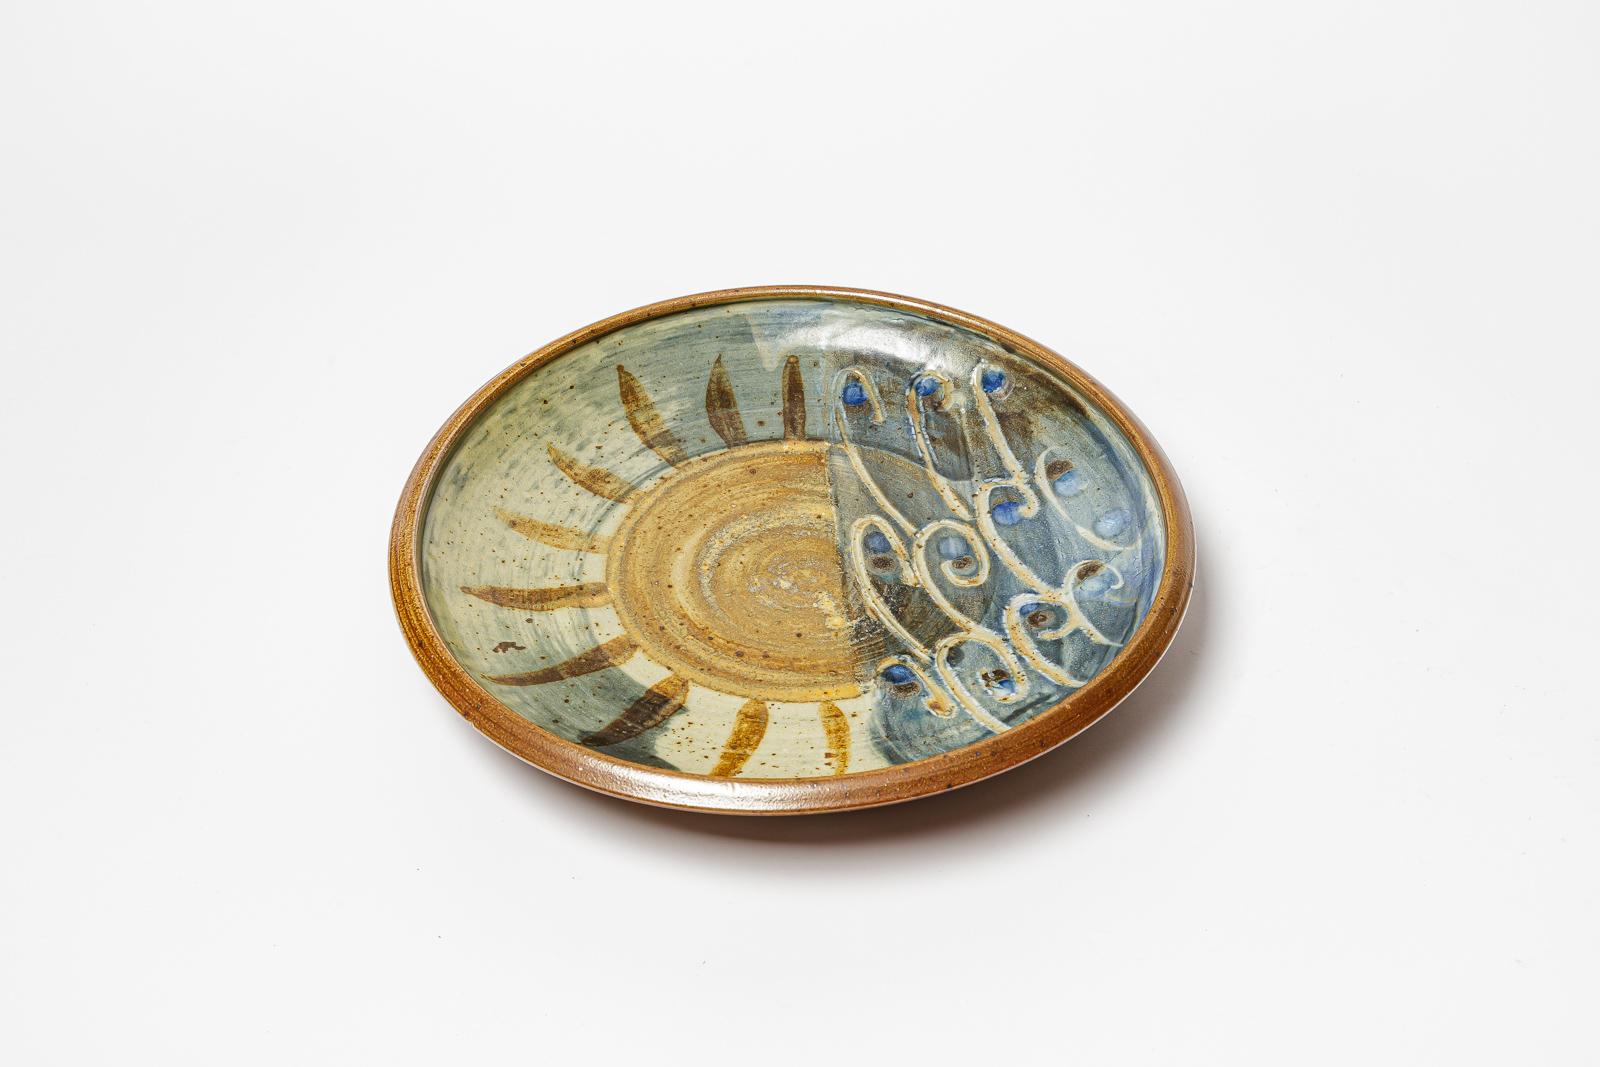 Beaux Arts Glazed stoneware plate, France. For Sale